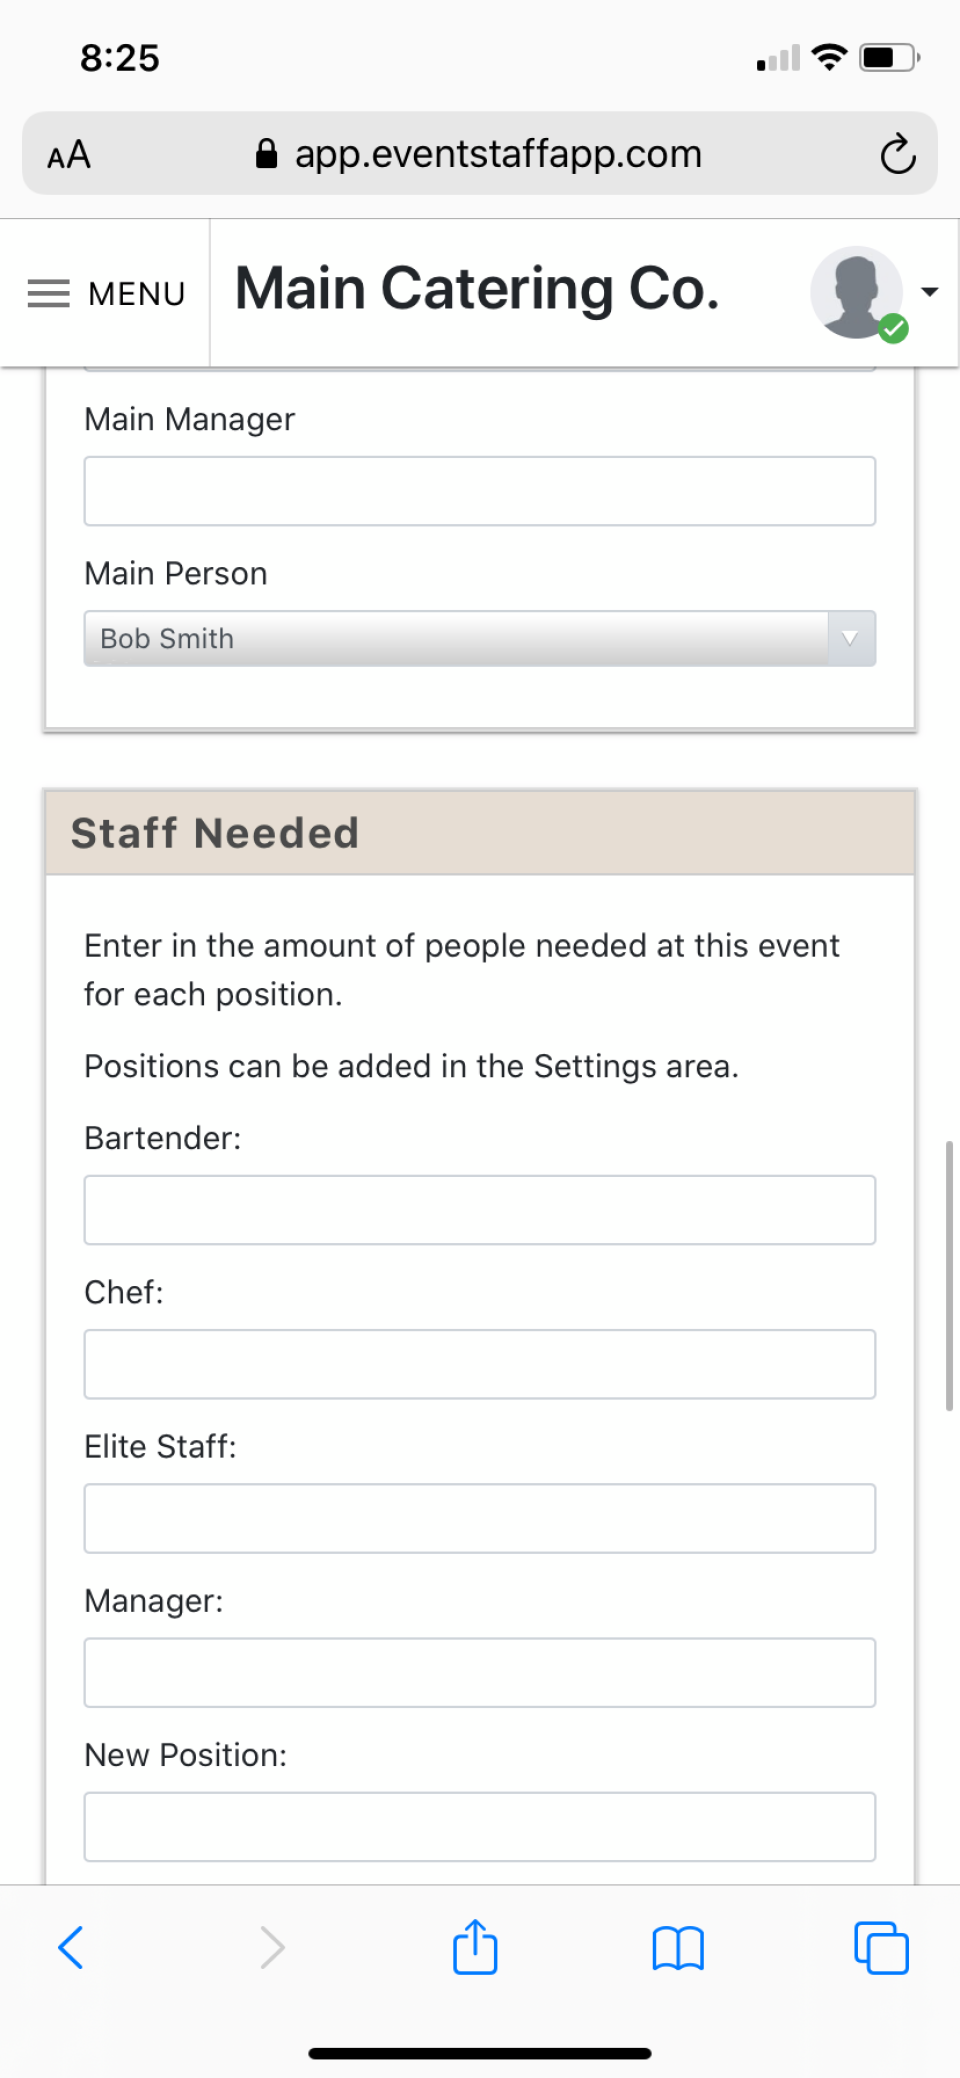 Quickly and easily fill work shifts for your events